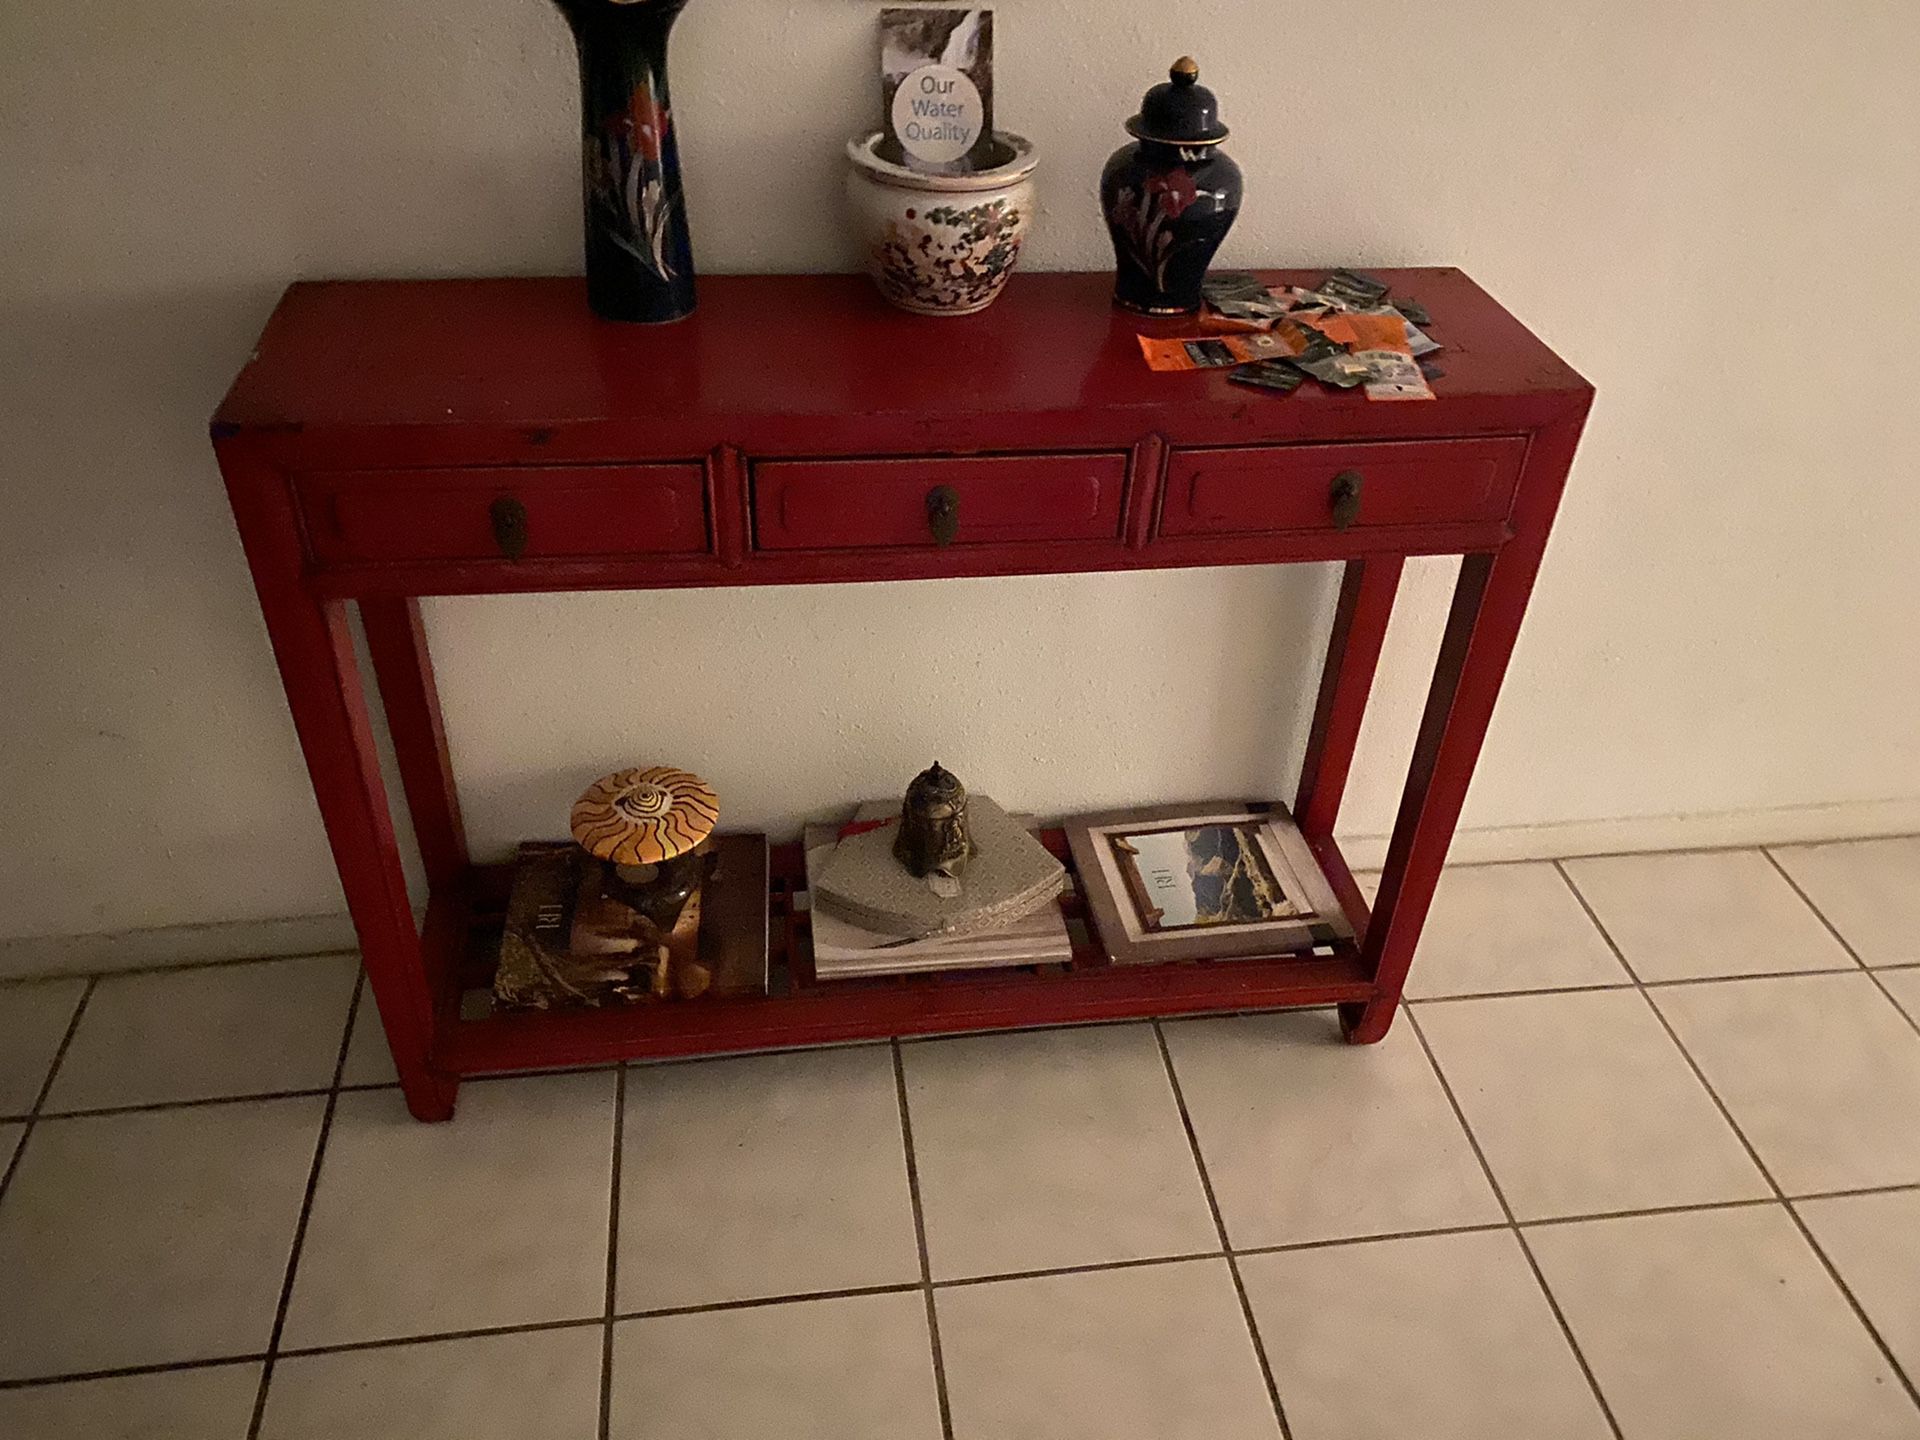 Distressed Red Elmwood Chinese Ming Console Table with 3 Drawers